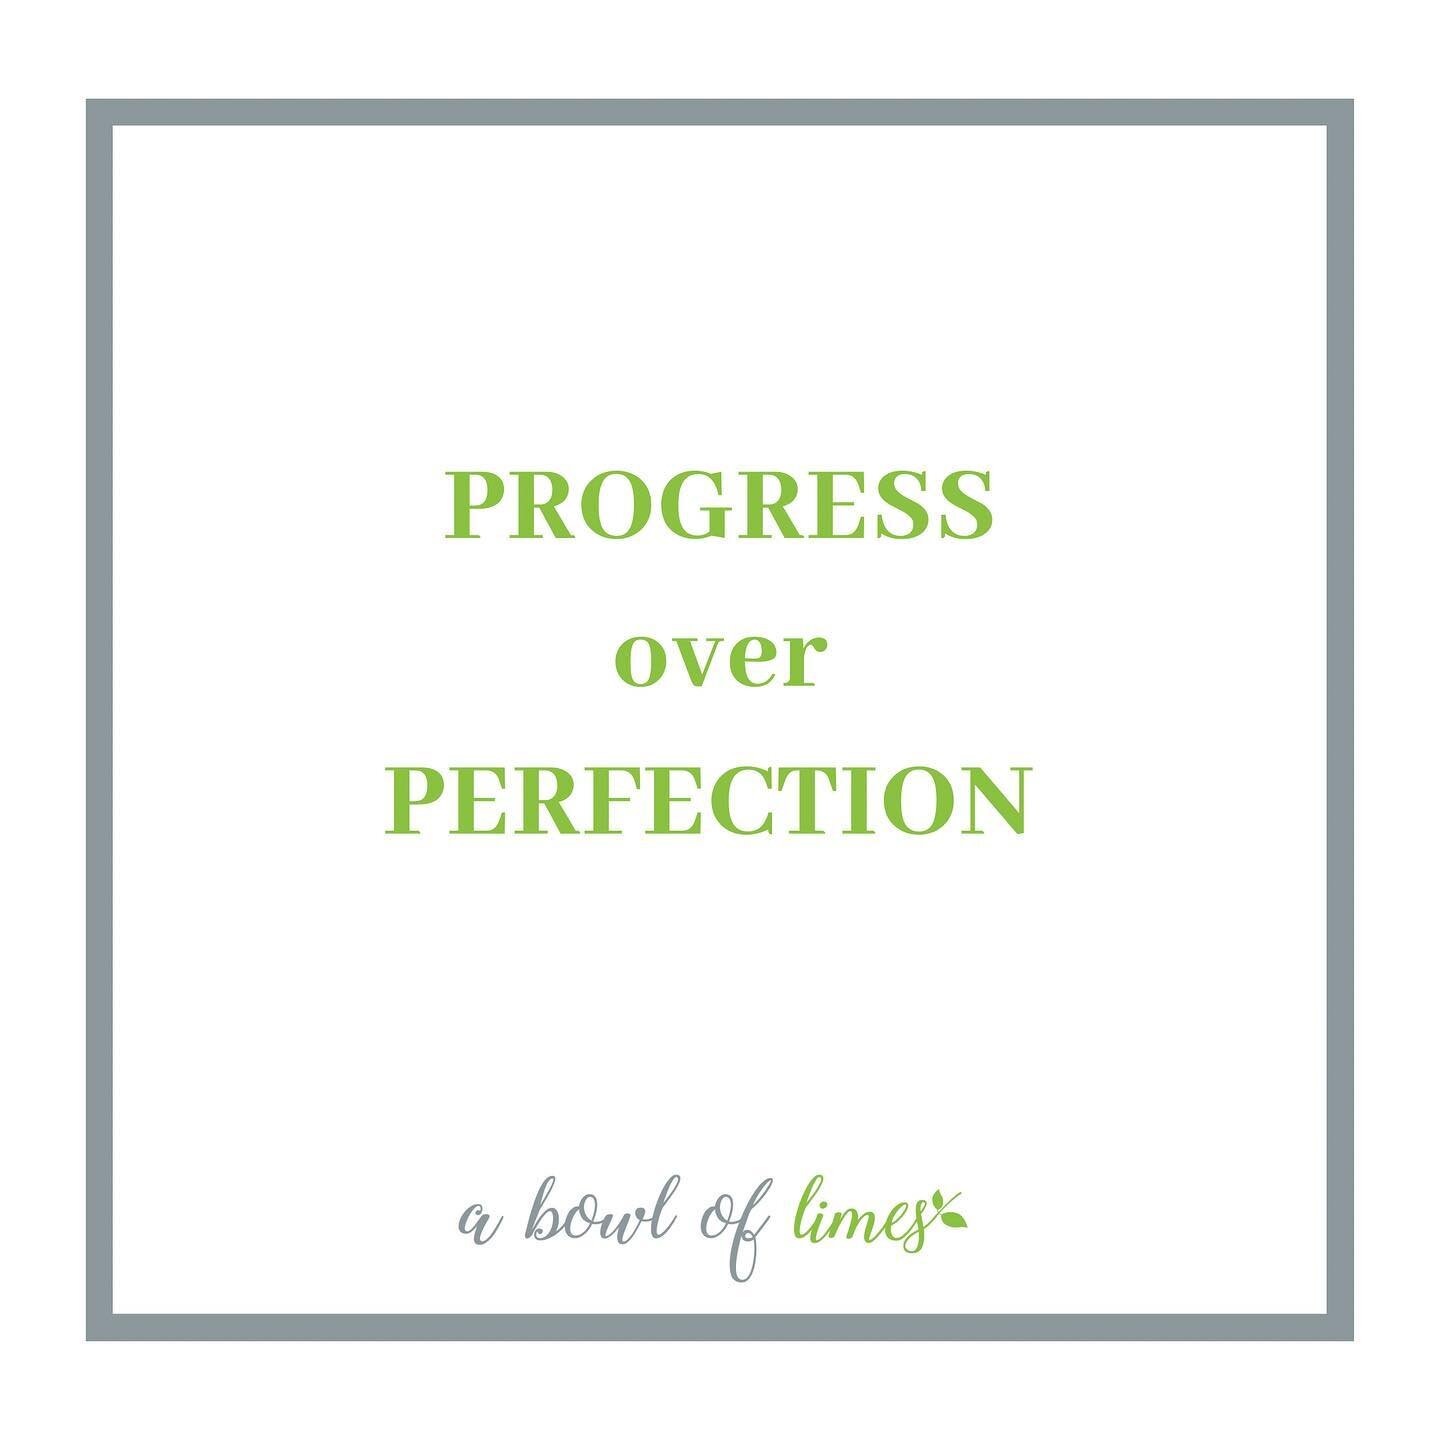 Sometimes aiming for PERFECTION can be super positive but sometimes it can result in self-criticism &amp; self-sabotage. If if you fall short it has a tendency to lead to a general feeling of lack of motivation &amp; a loss of enthusiasm.

Try to shi